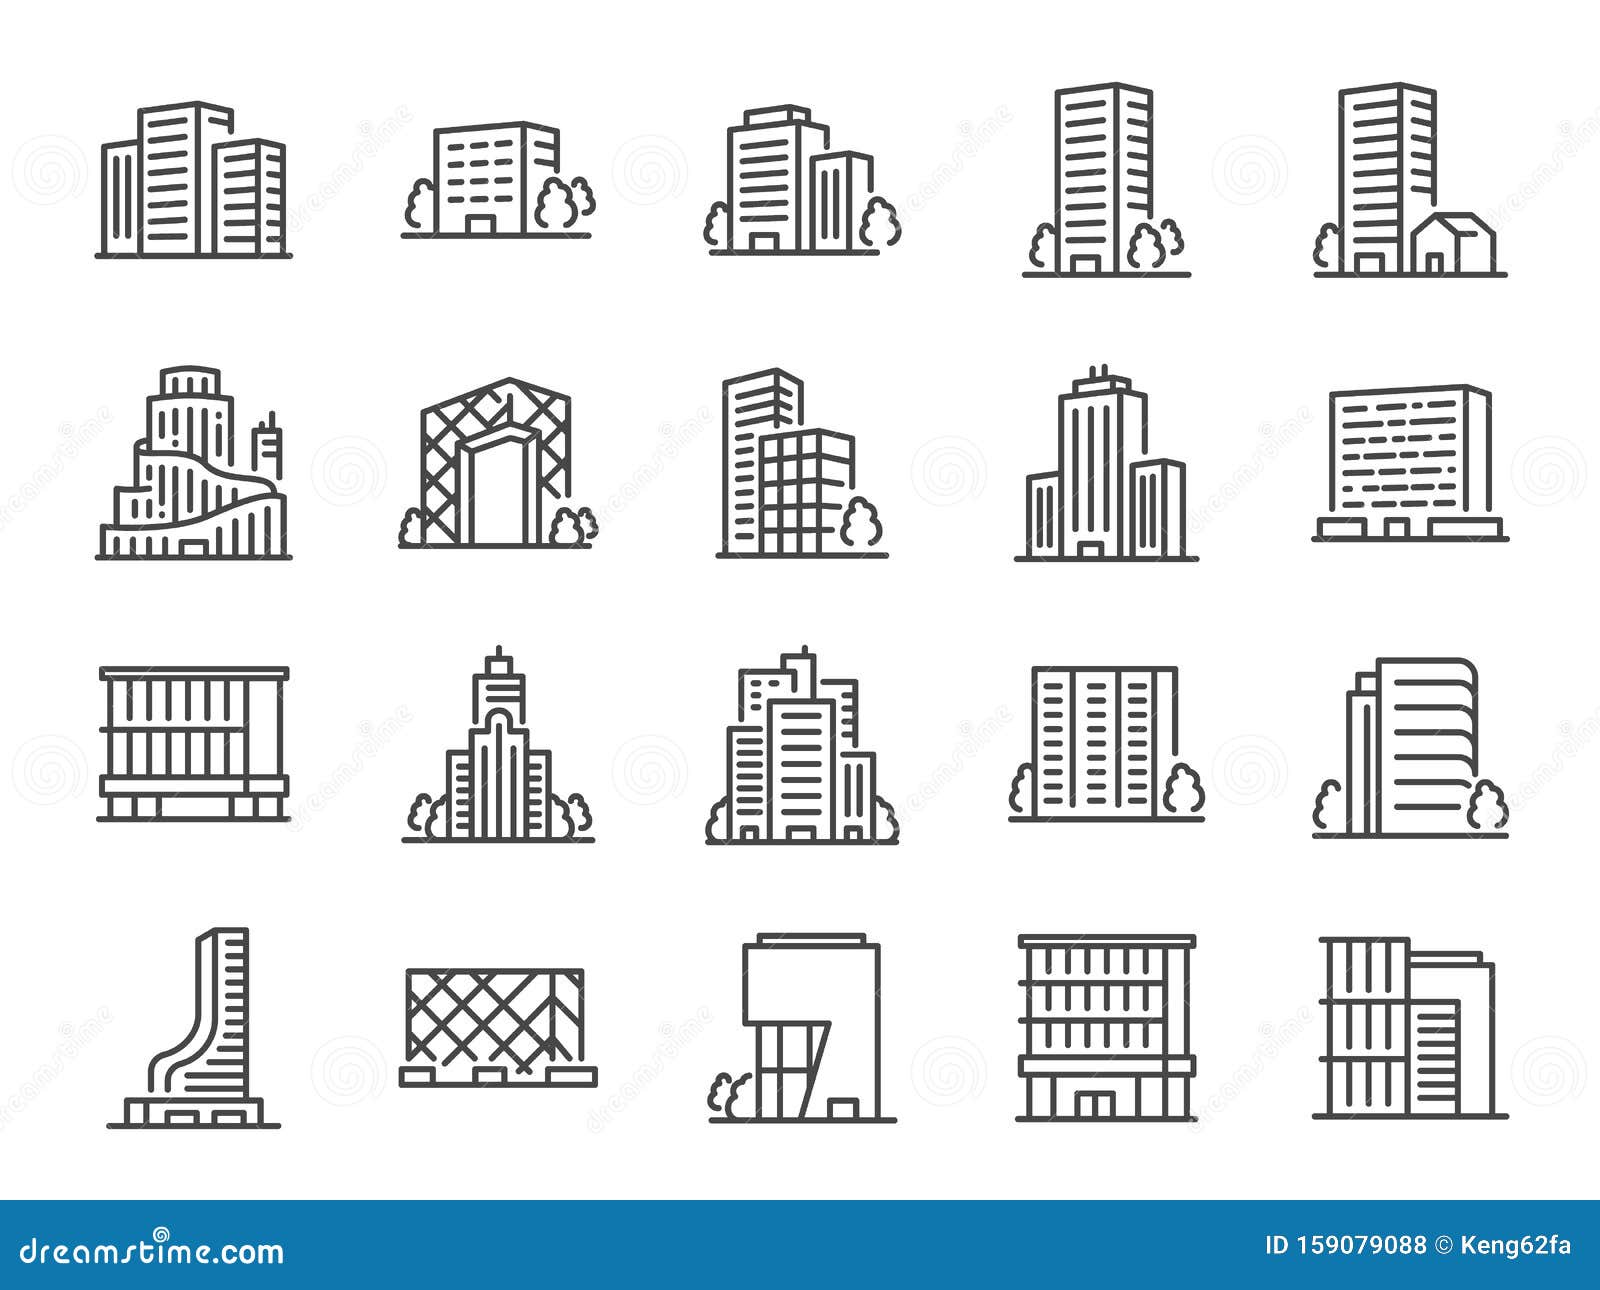 building line icon set. included icons as city  scape, architecture,ÃÂ dwelling, skyscraper, structure and more.